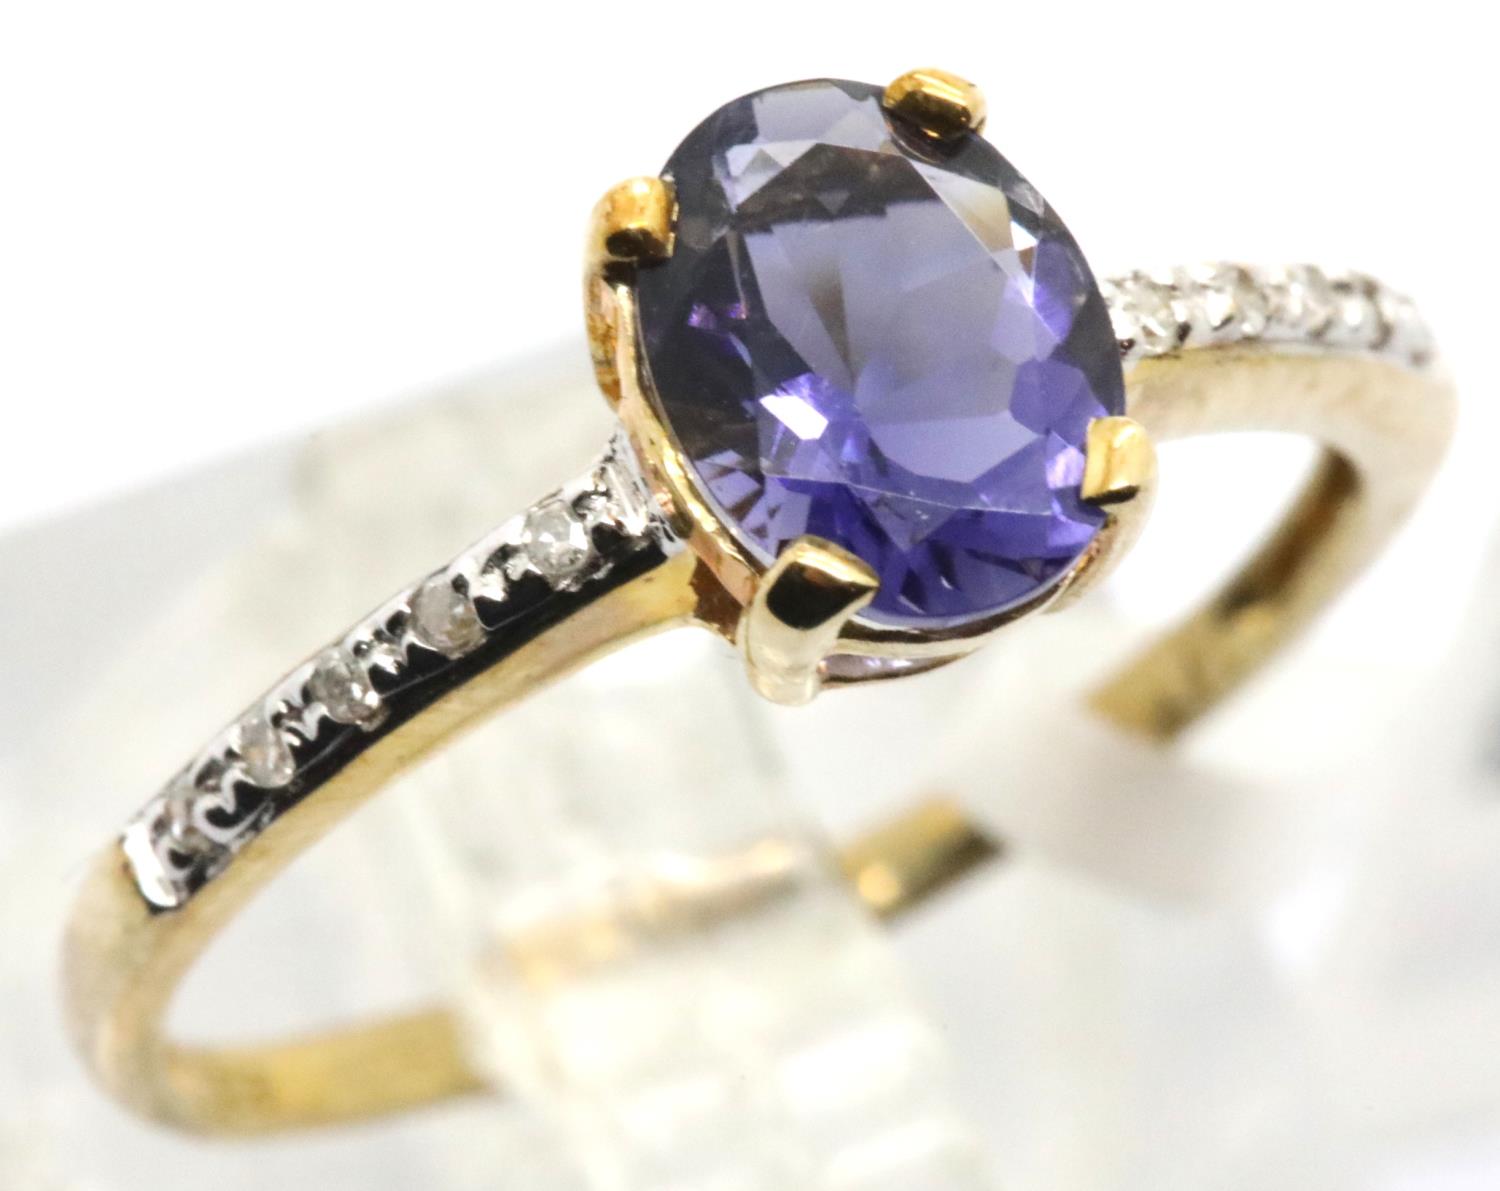 9ct gold tanzanite ring with diamond shoulders, size O, 1.7g. Condition report: Surface scratching